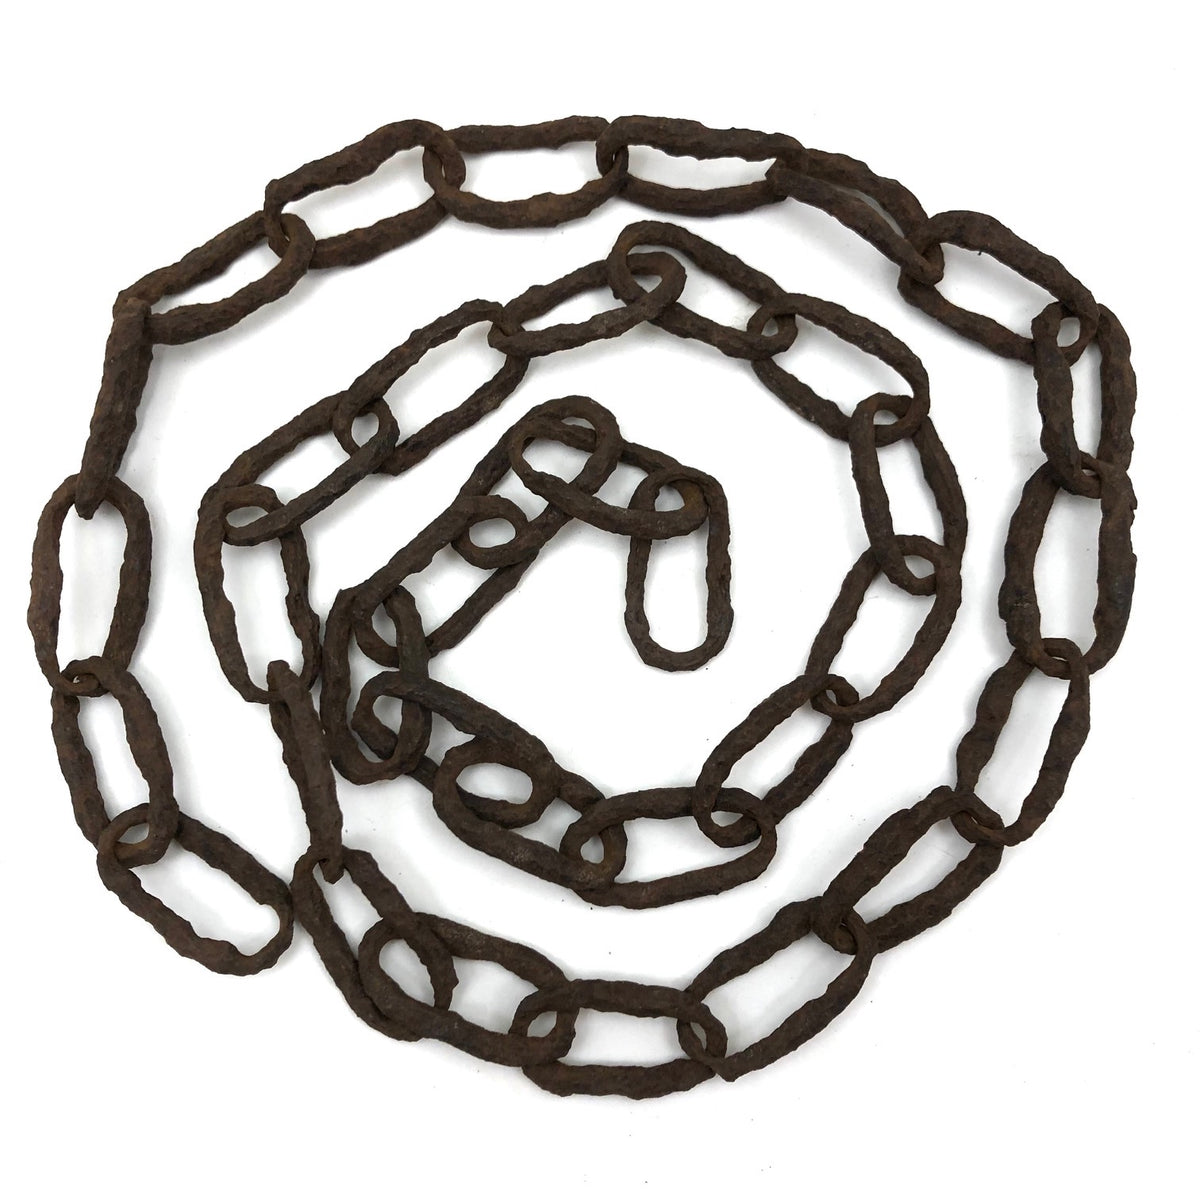 Beautifully Eroded Old Hand-forged Iron Chain – critical EYE Finds